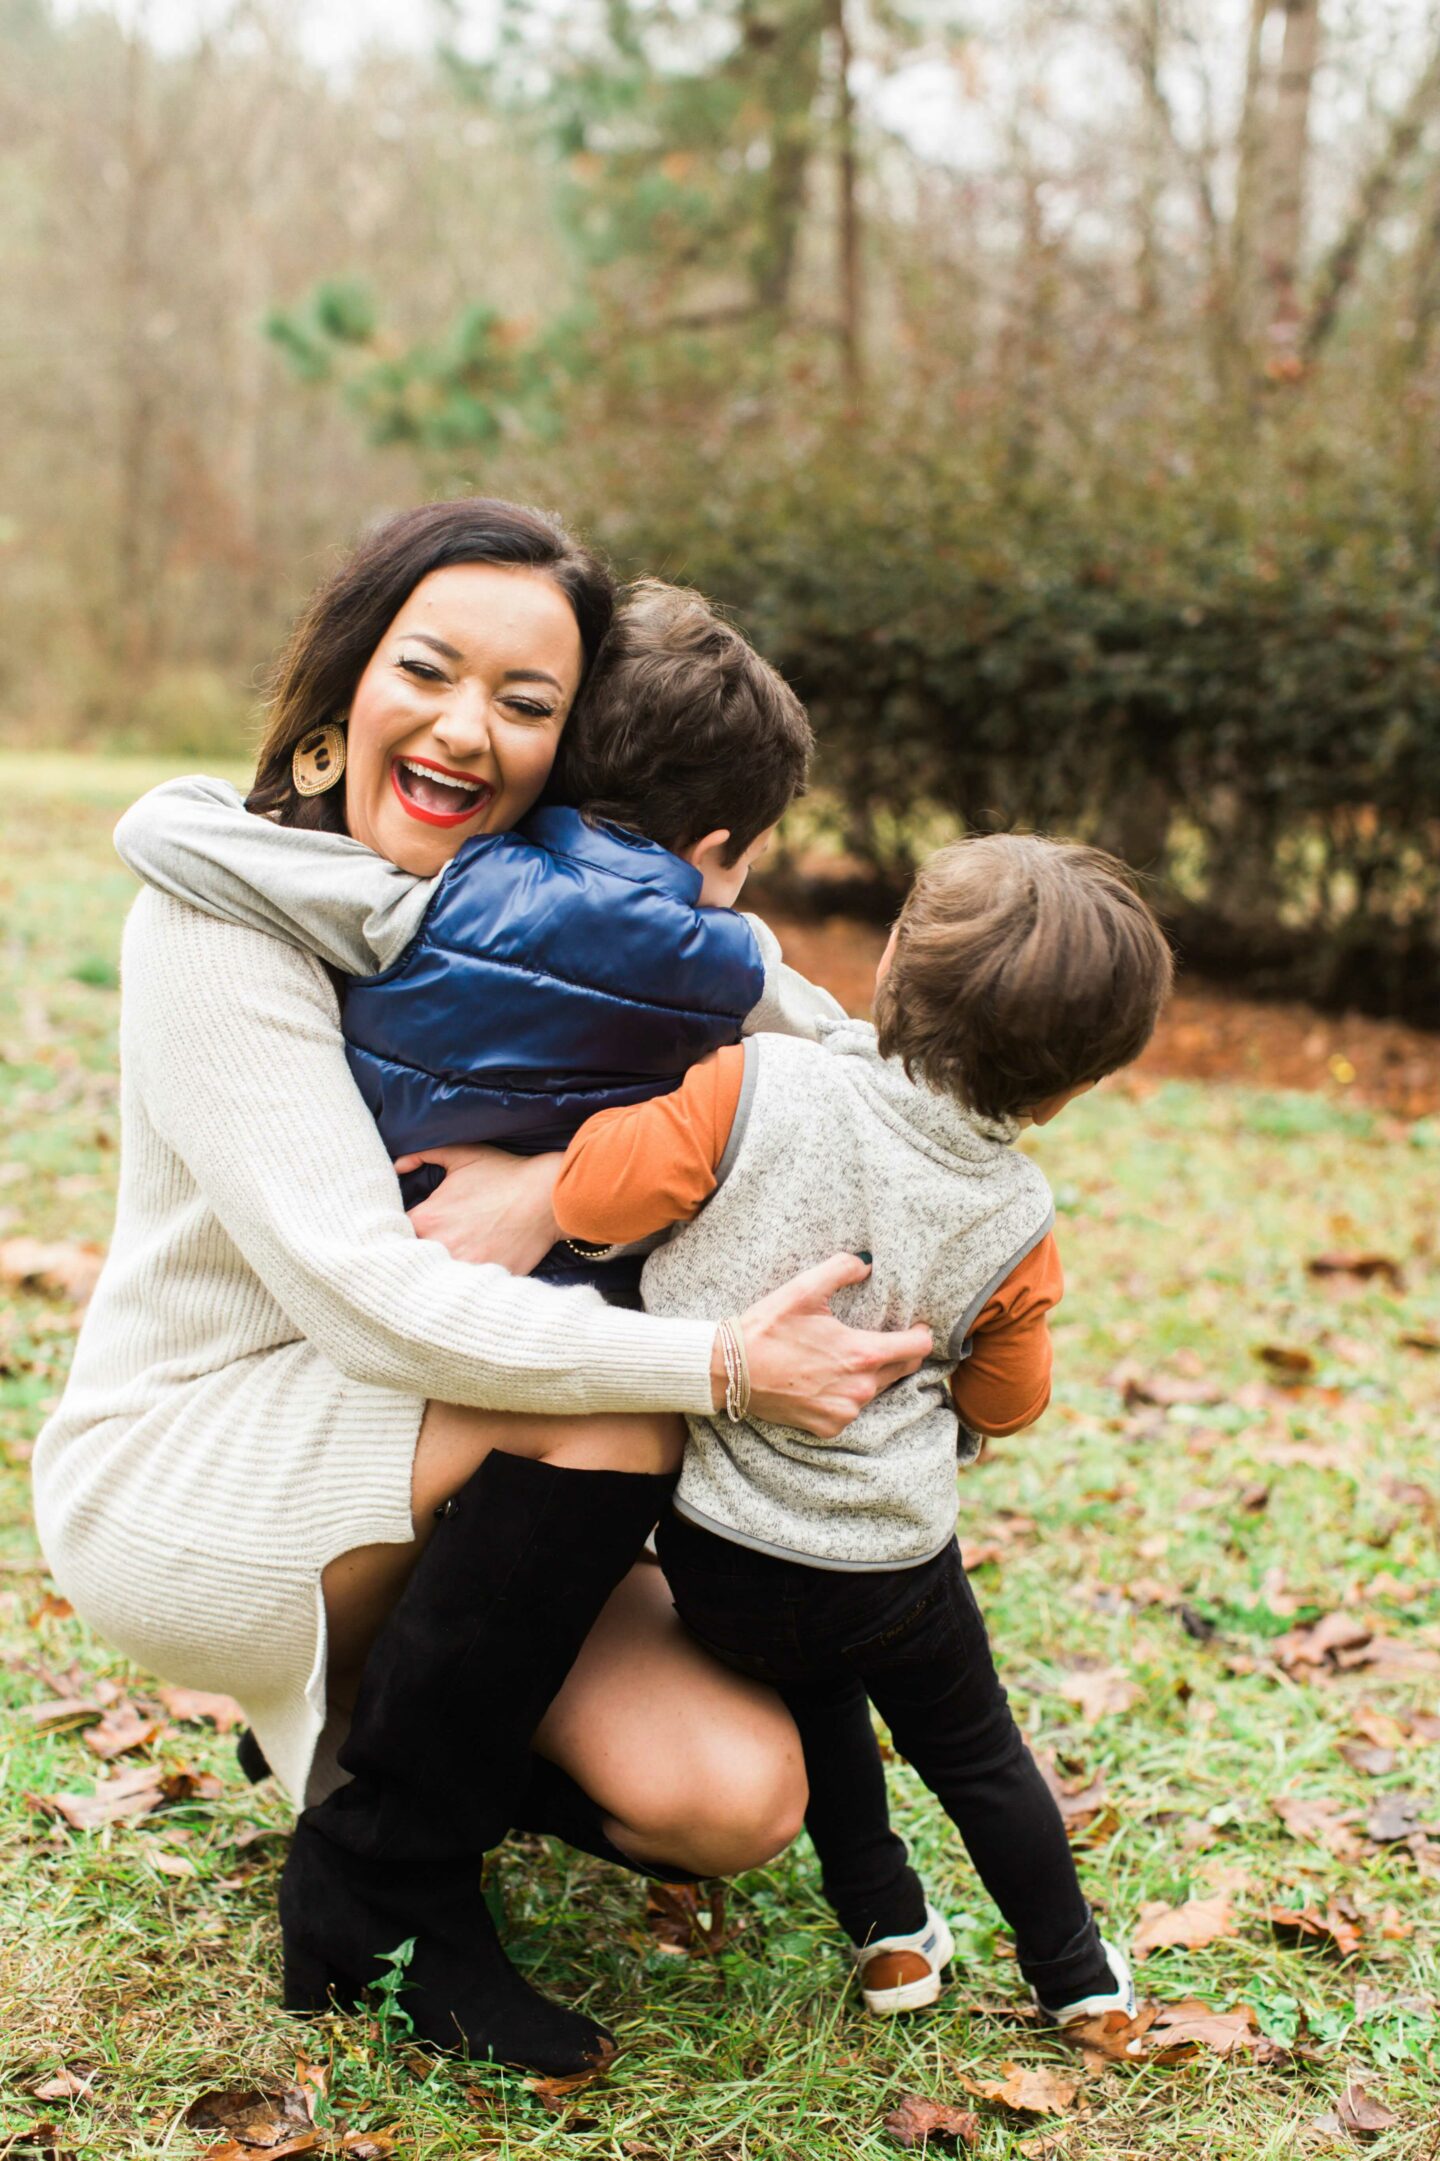 Podcast host + lifestyle blogger, My Life Well Loved, shares her insight on whole health in motherhood. Click NOW to read and listen!